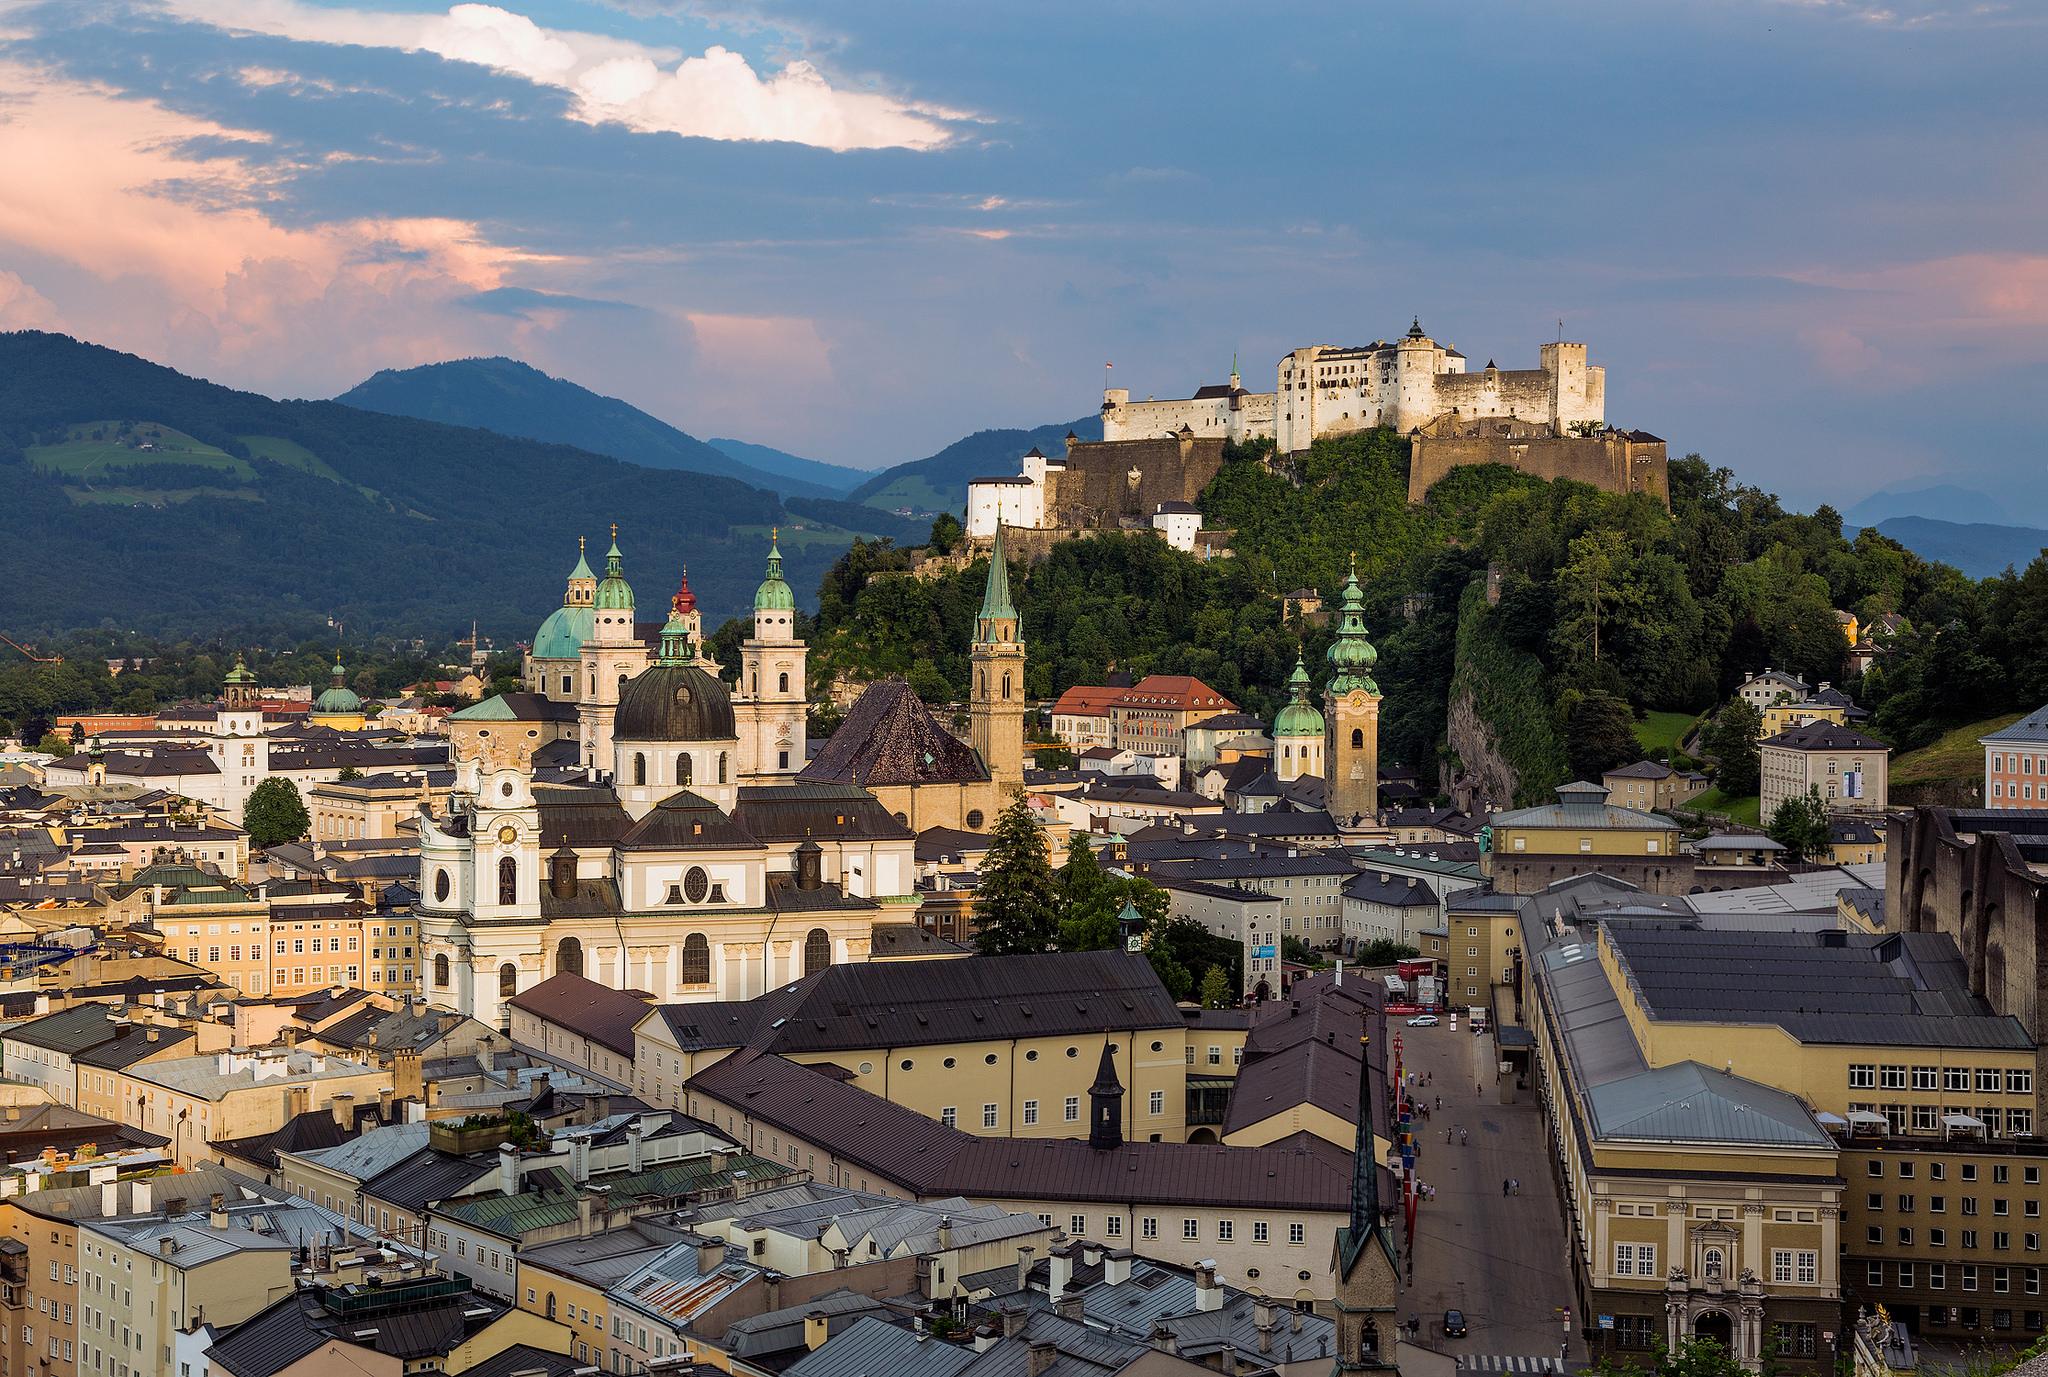 Wallpapers The castle of Salzburg with views of the Old town Salzburg Austria on the desktop